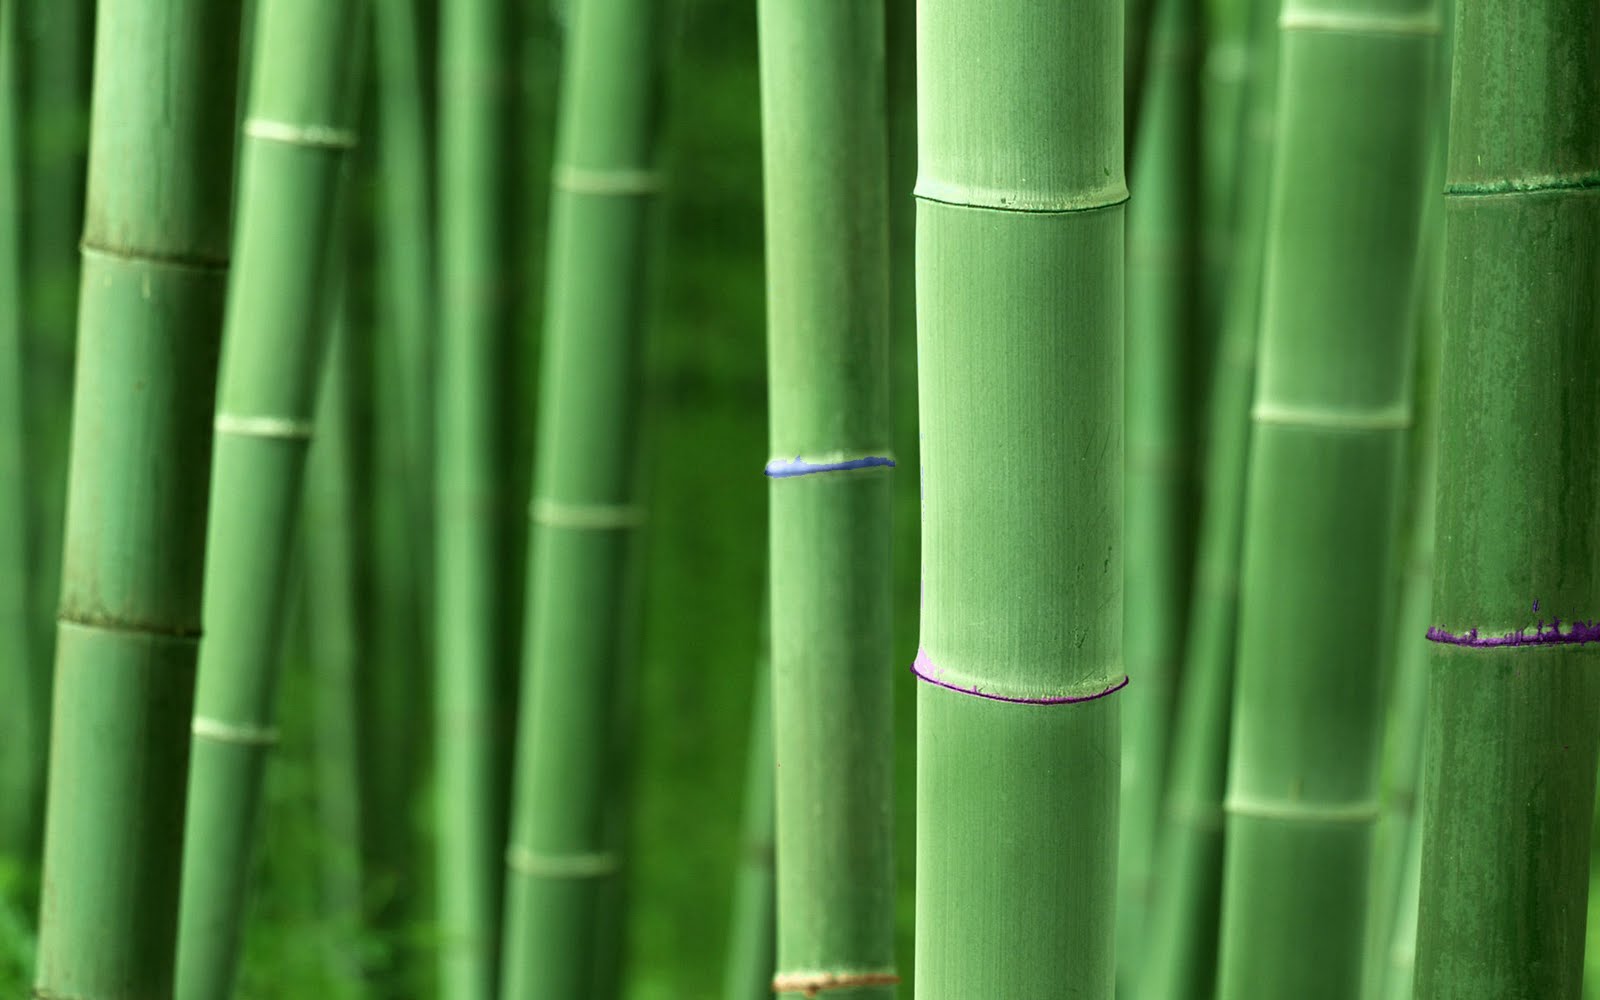 Bamboo Wallpaper: Bamboo Wallpapers Collection 20-30